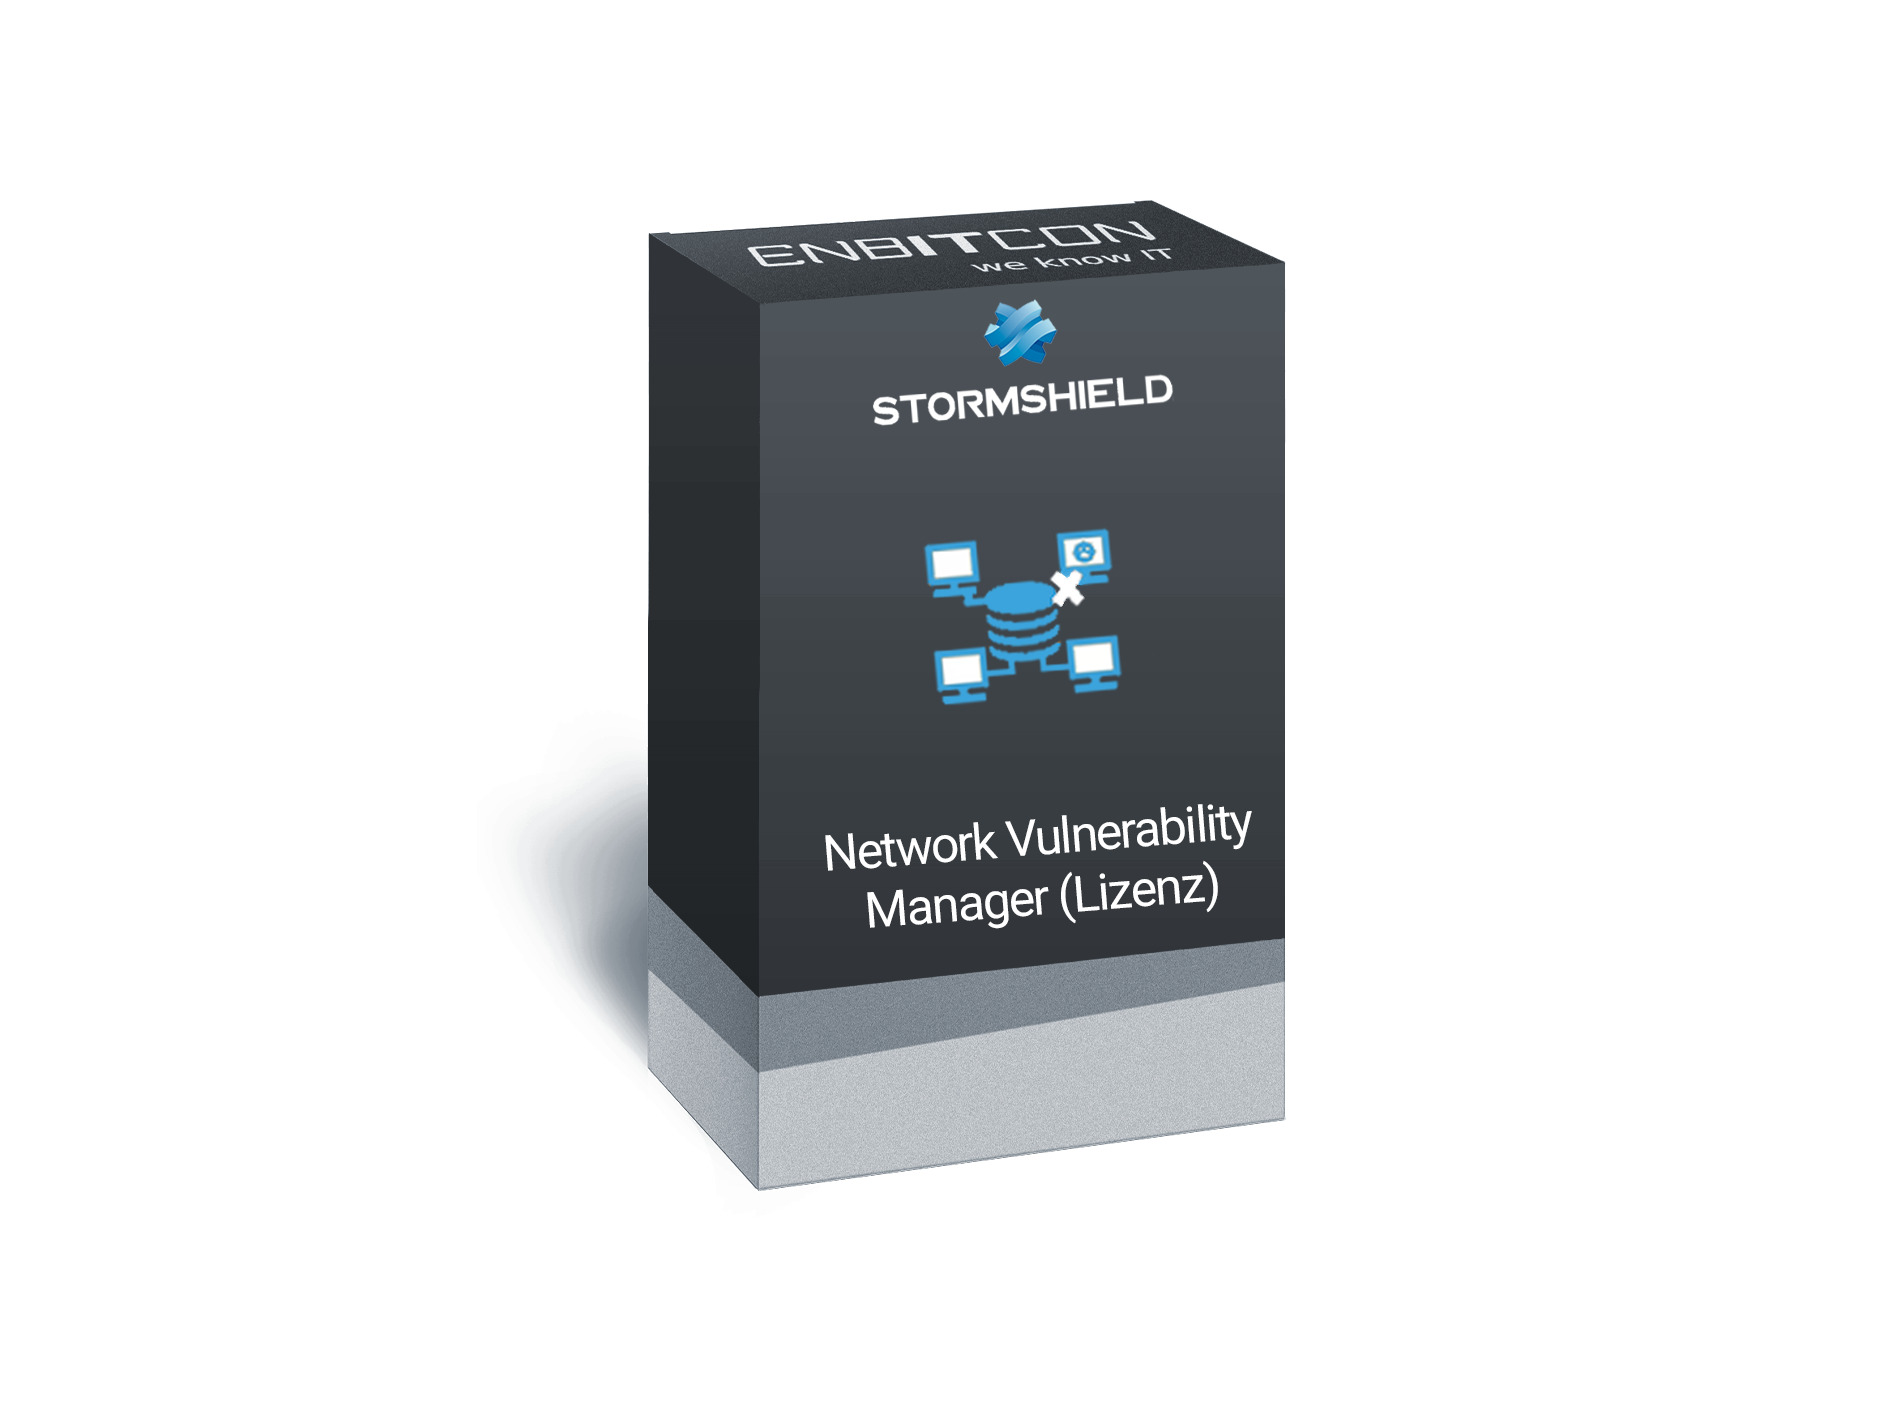 Stormshield SN3100 Network Vulnerability Manager option